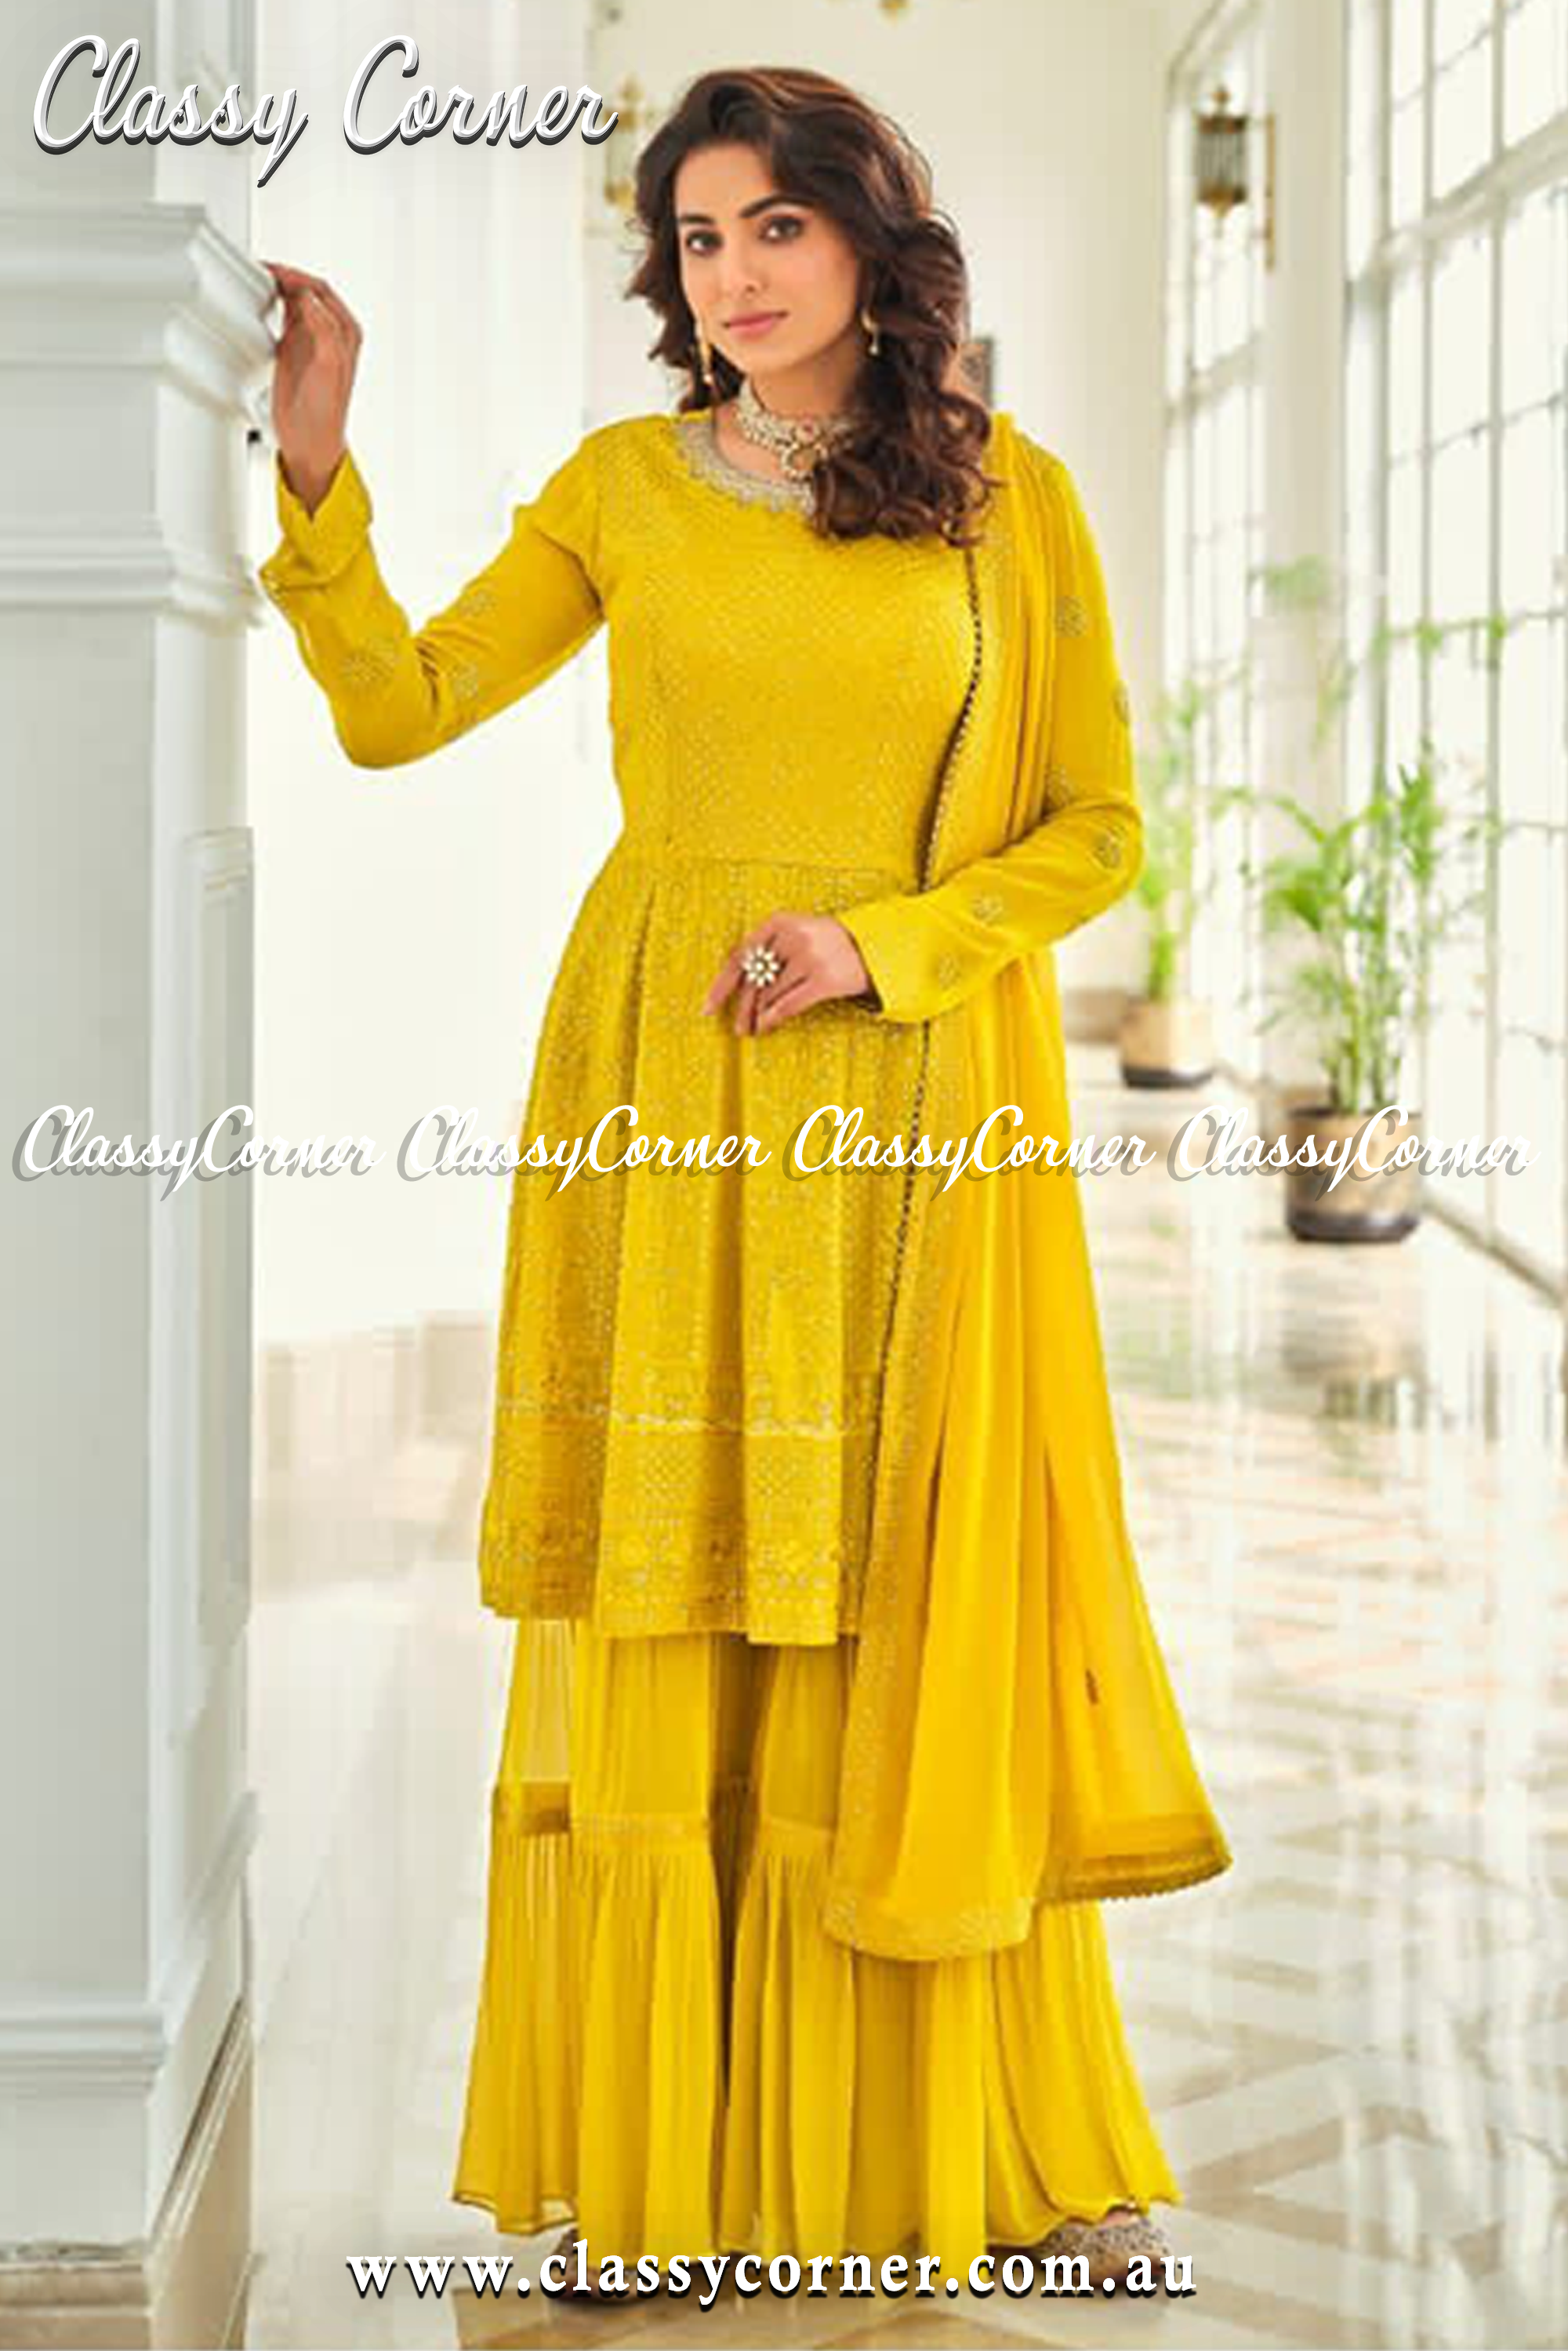 Charming Yellow Georgette 3pc Suit - Classy Corner